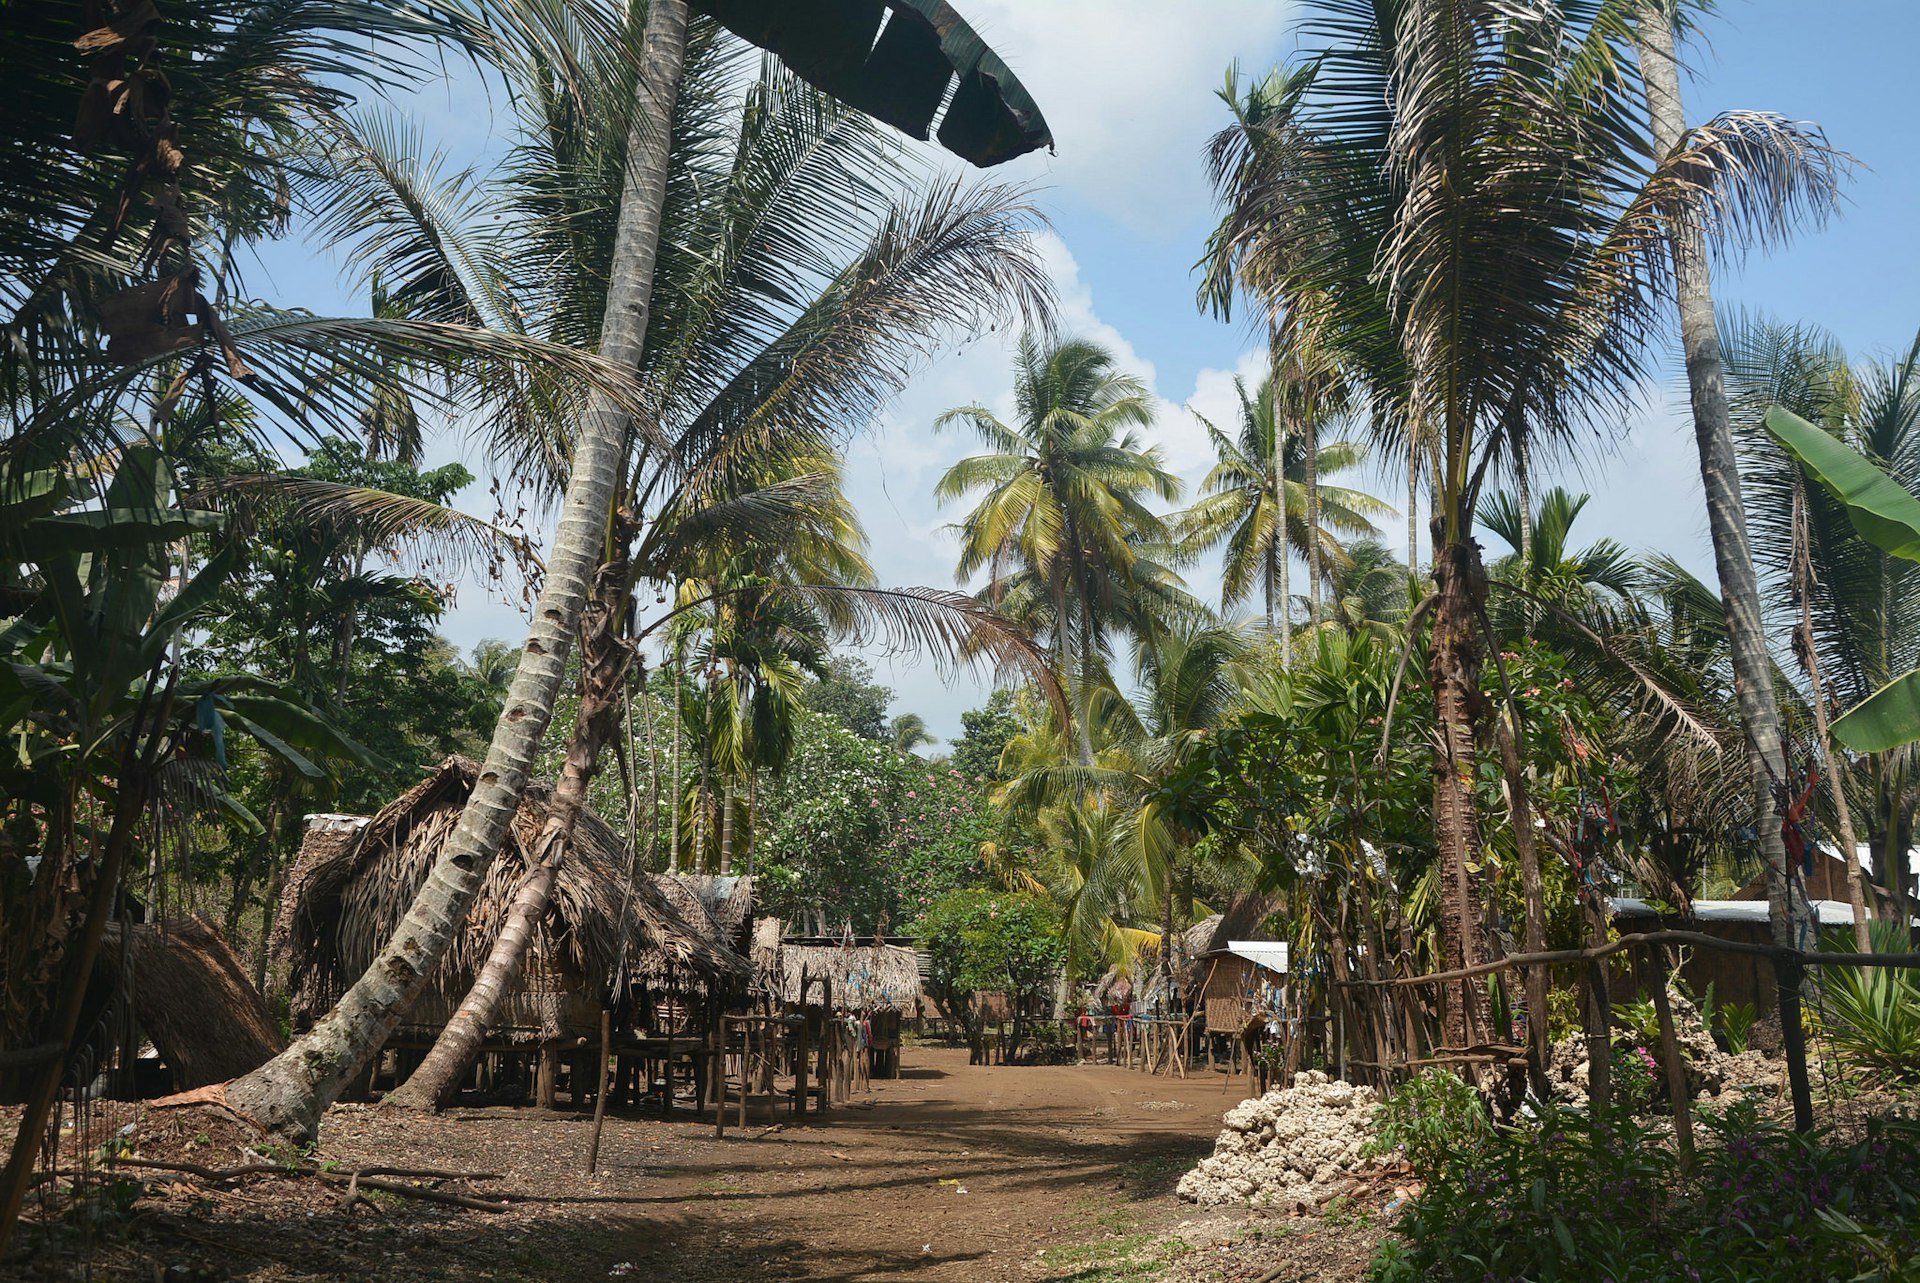 Getting off the grid a a village stay on the Trobriand Islands. Anna Kaminski / Lonely Planet